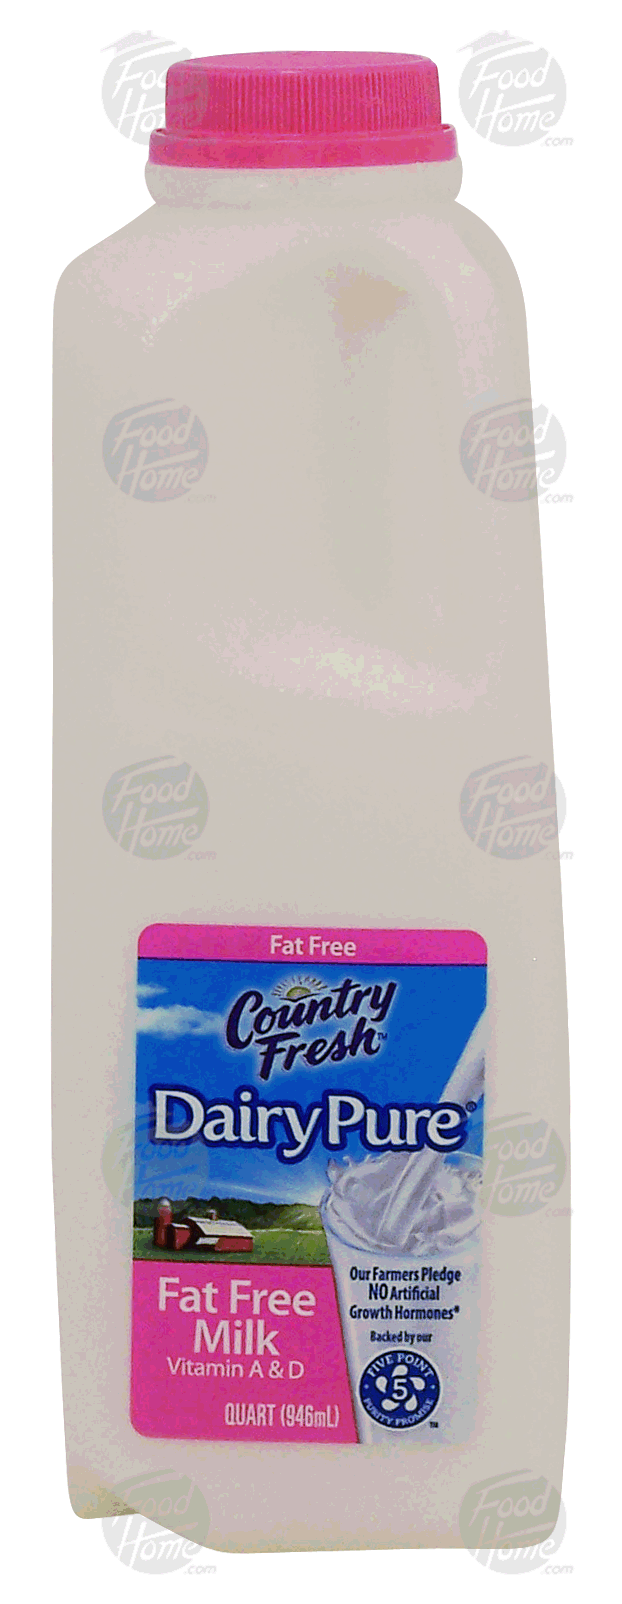 Country Fresh Dairy Pure milk, fat free, vitamin A & D Full-Size Picture